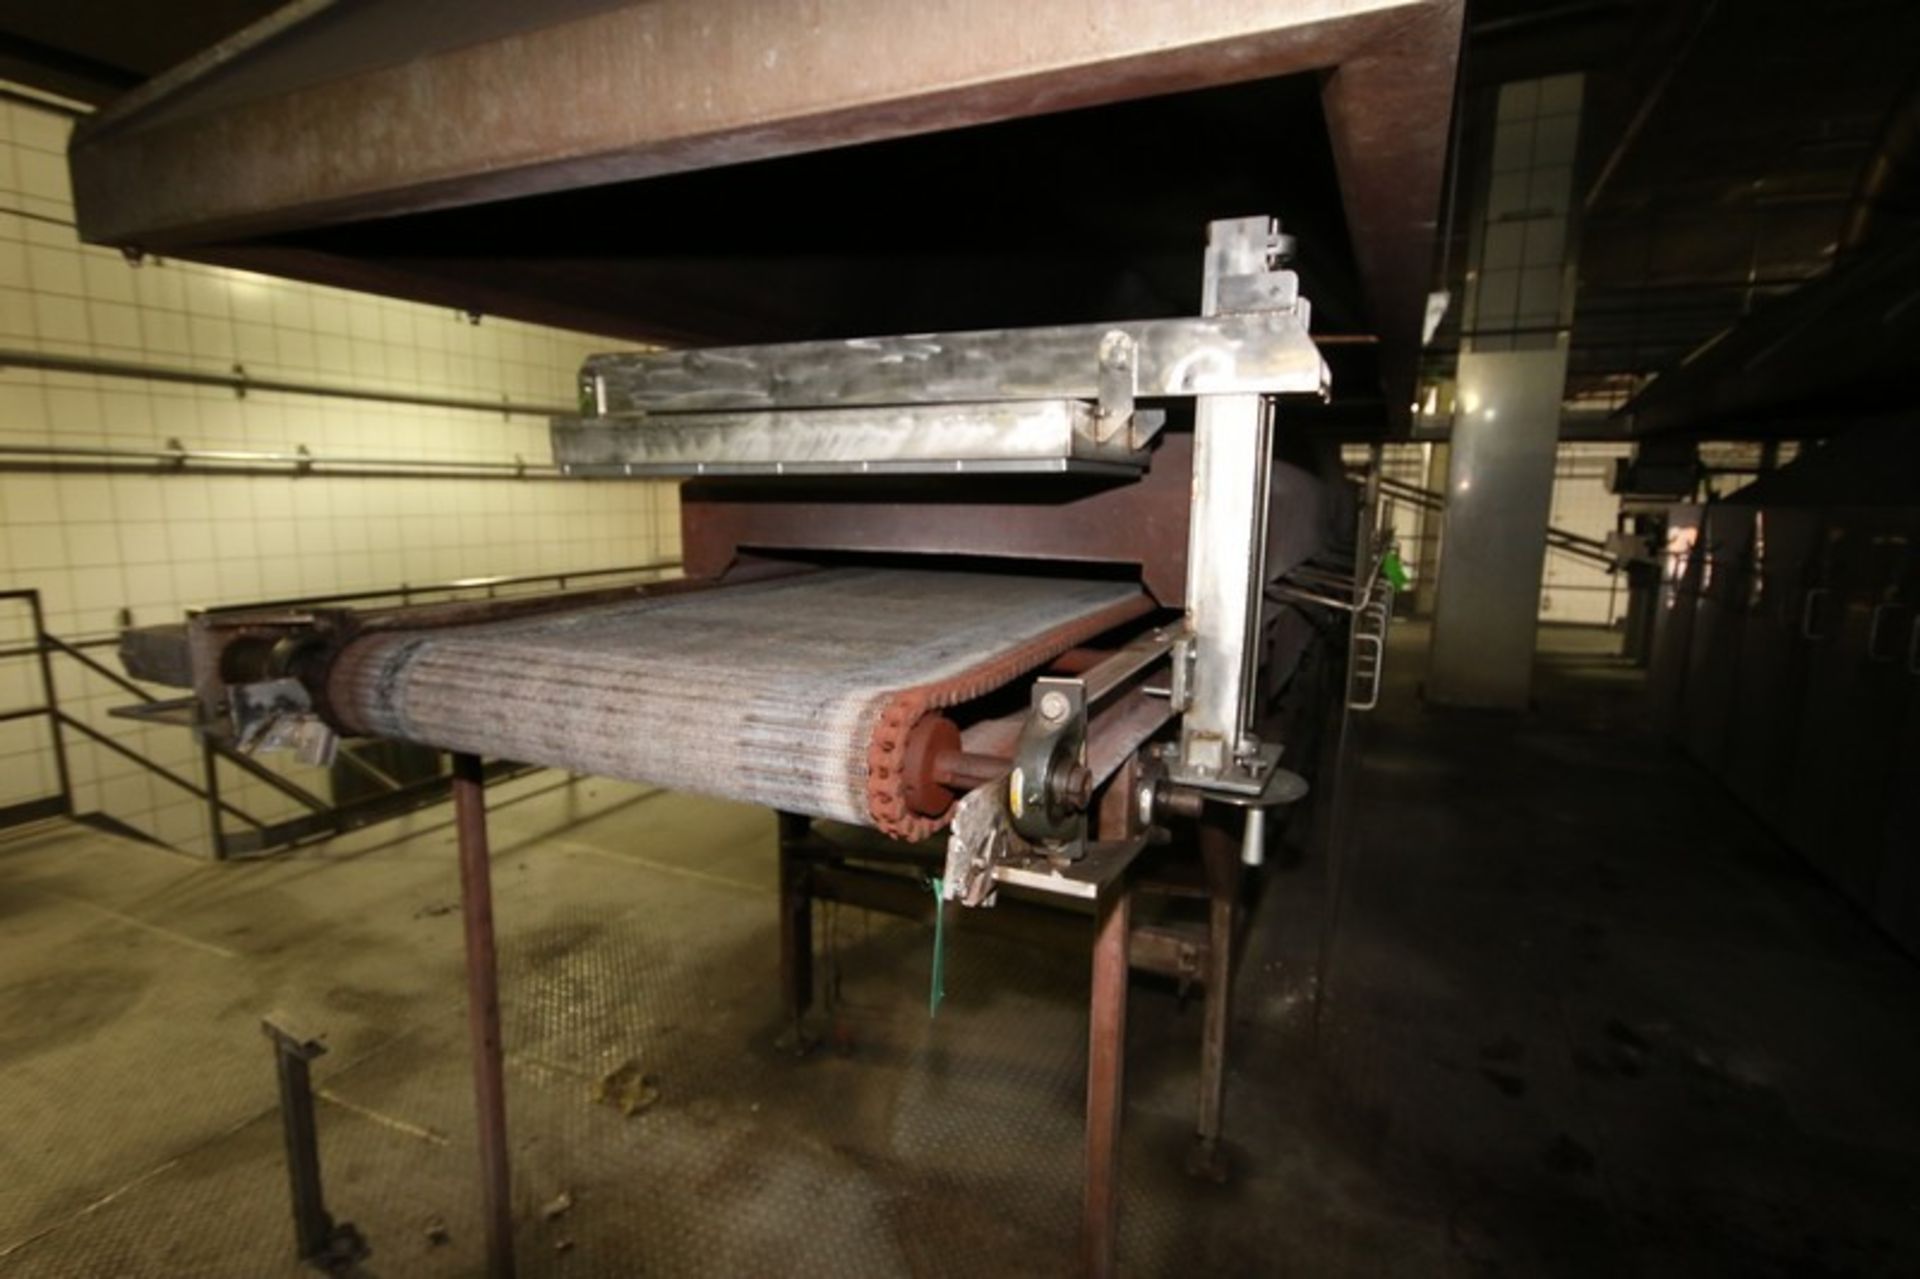 Natural Gas Fire Roaster #6, with Aprox. 33" W Belt, Includes S/S Exhaust Hood, Overall Dims.: - Image 3 of 3